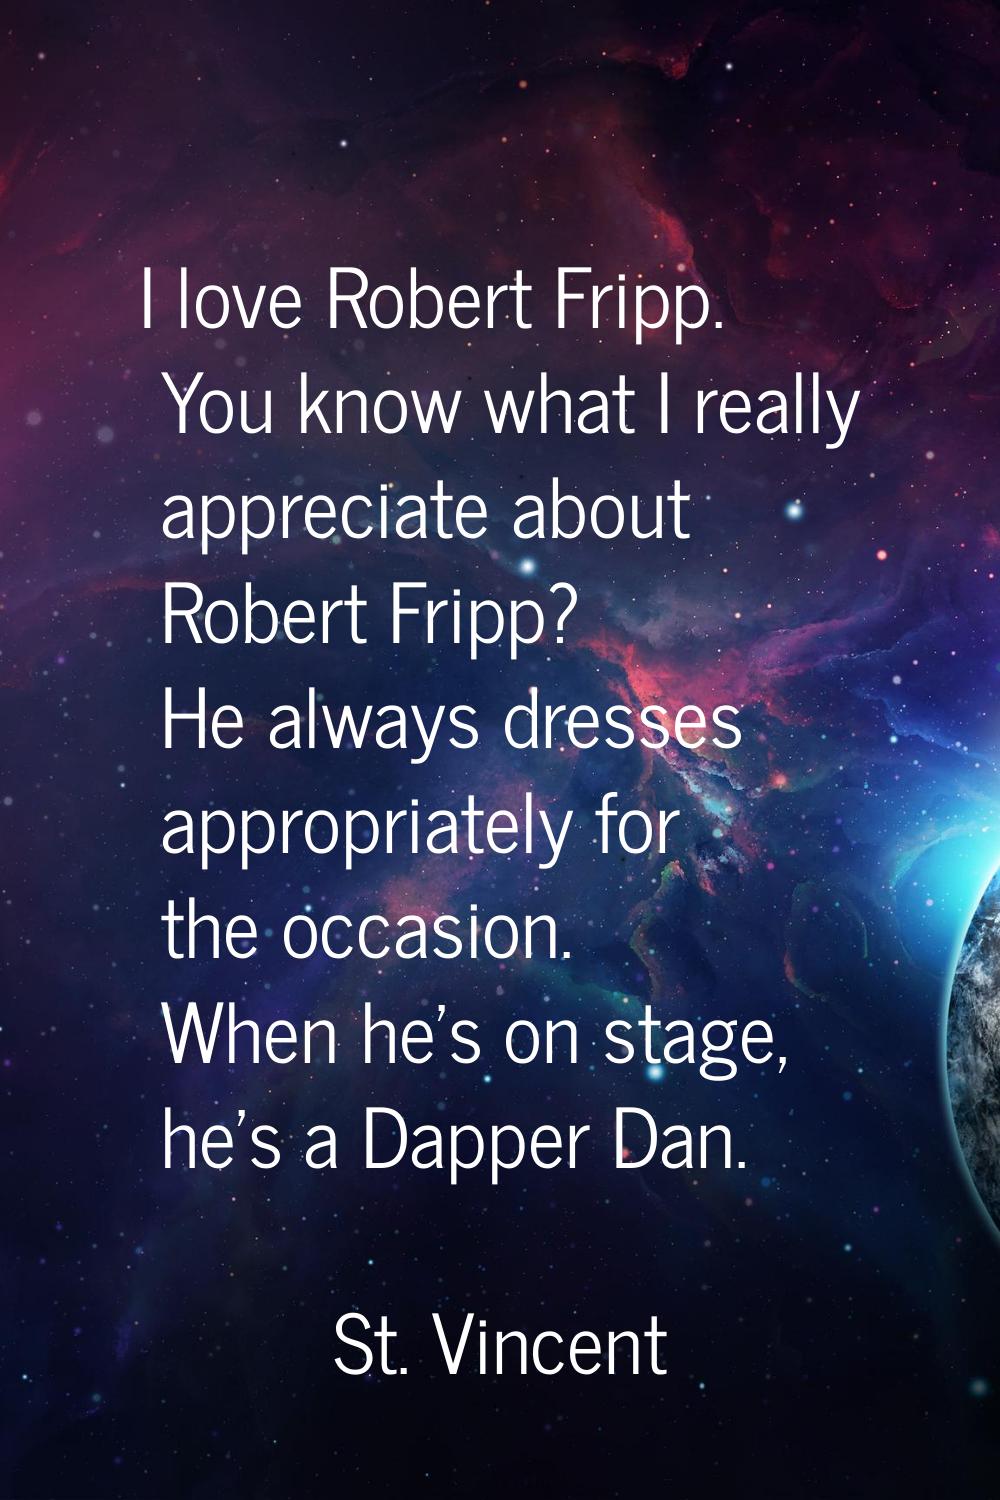 I love Robert Fripp. You know what I really appreciate about Robert Fripp? He always dresses approp